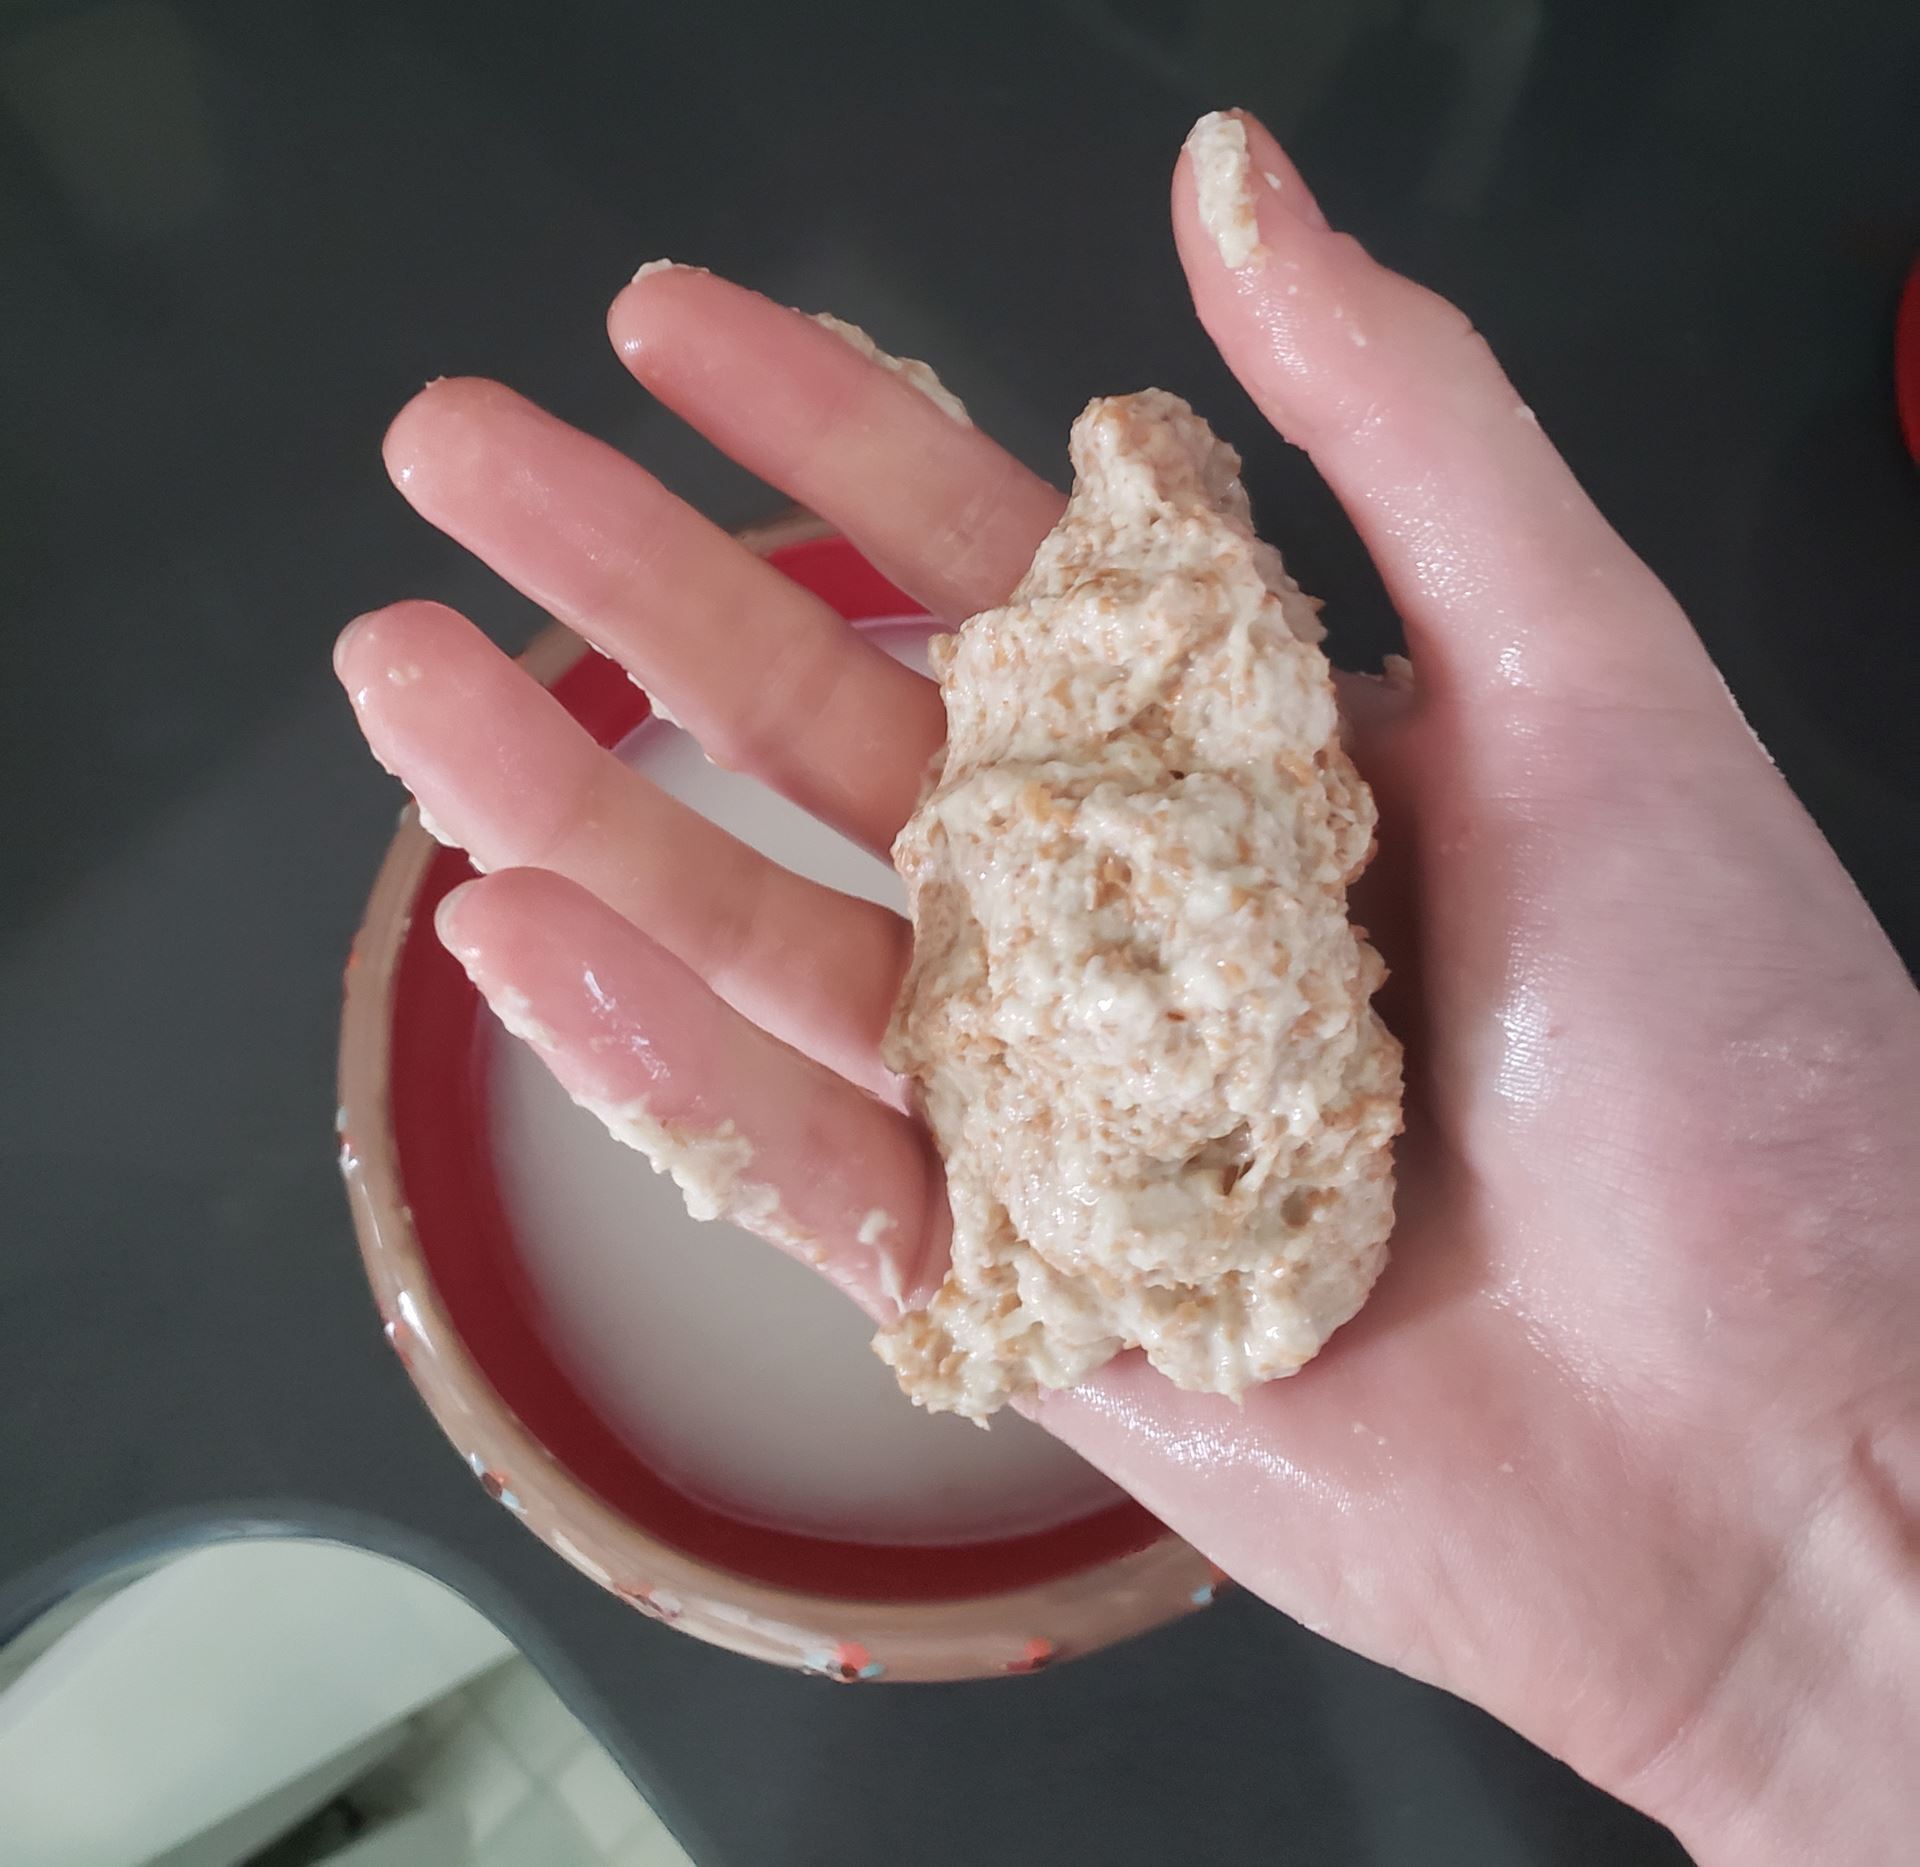 Photo of s hand holding a lump of gluten from flour. The hand is hovering over a bowl with water where the gluten was extracted from.